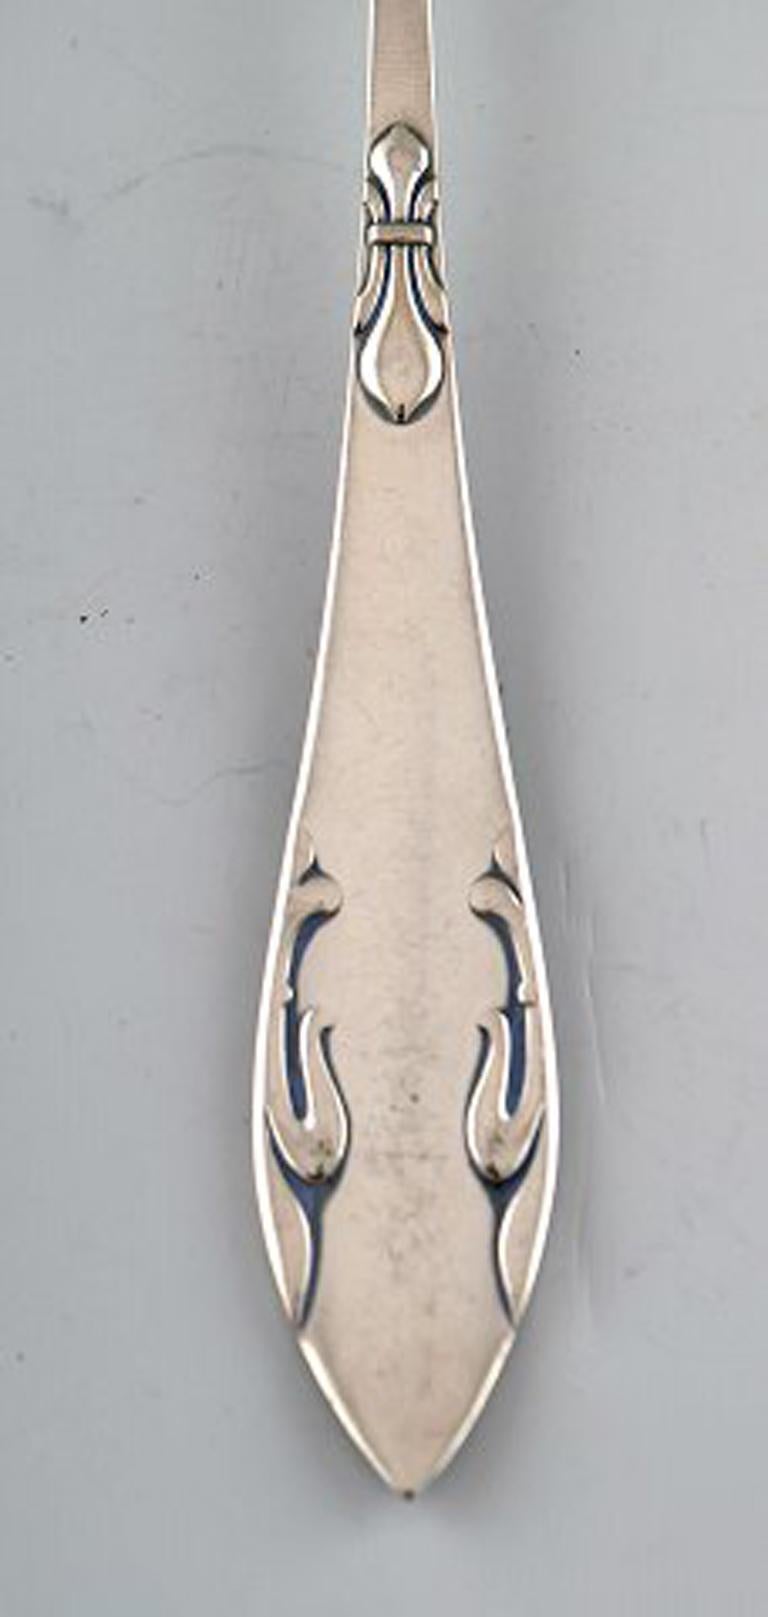 Danish silversmith. Fork in silver. 1940s. Ten pieces in stock.
Stamped.
In very good condition.
Measures: 17.5 cm.